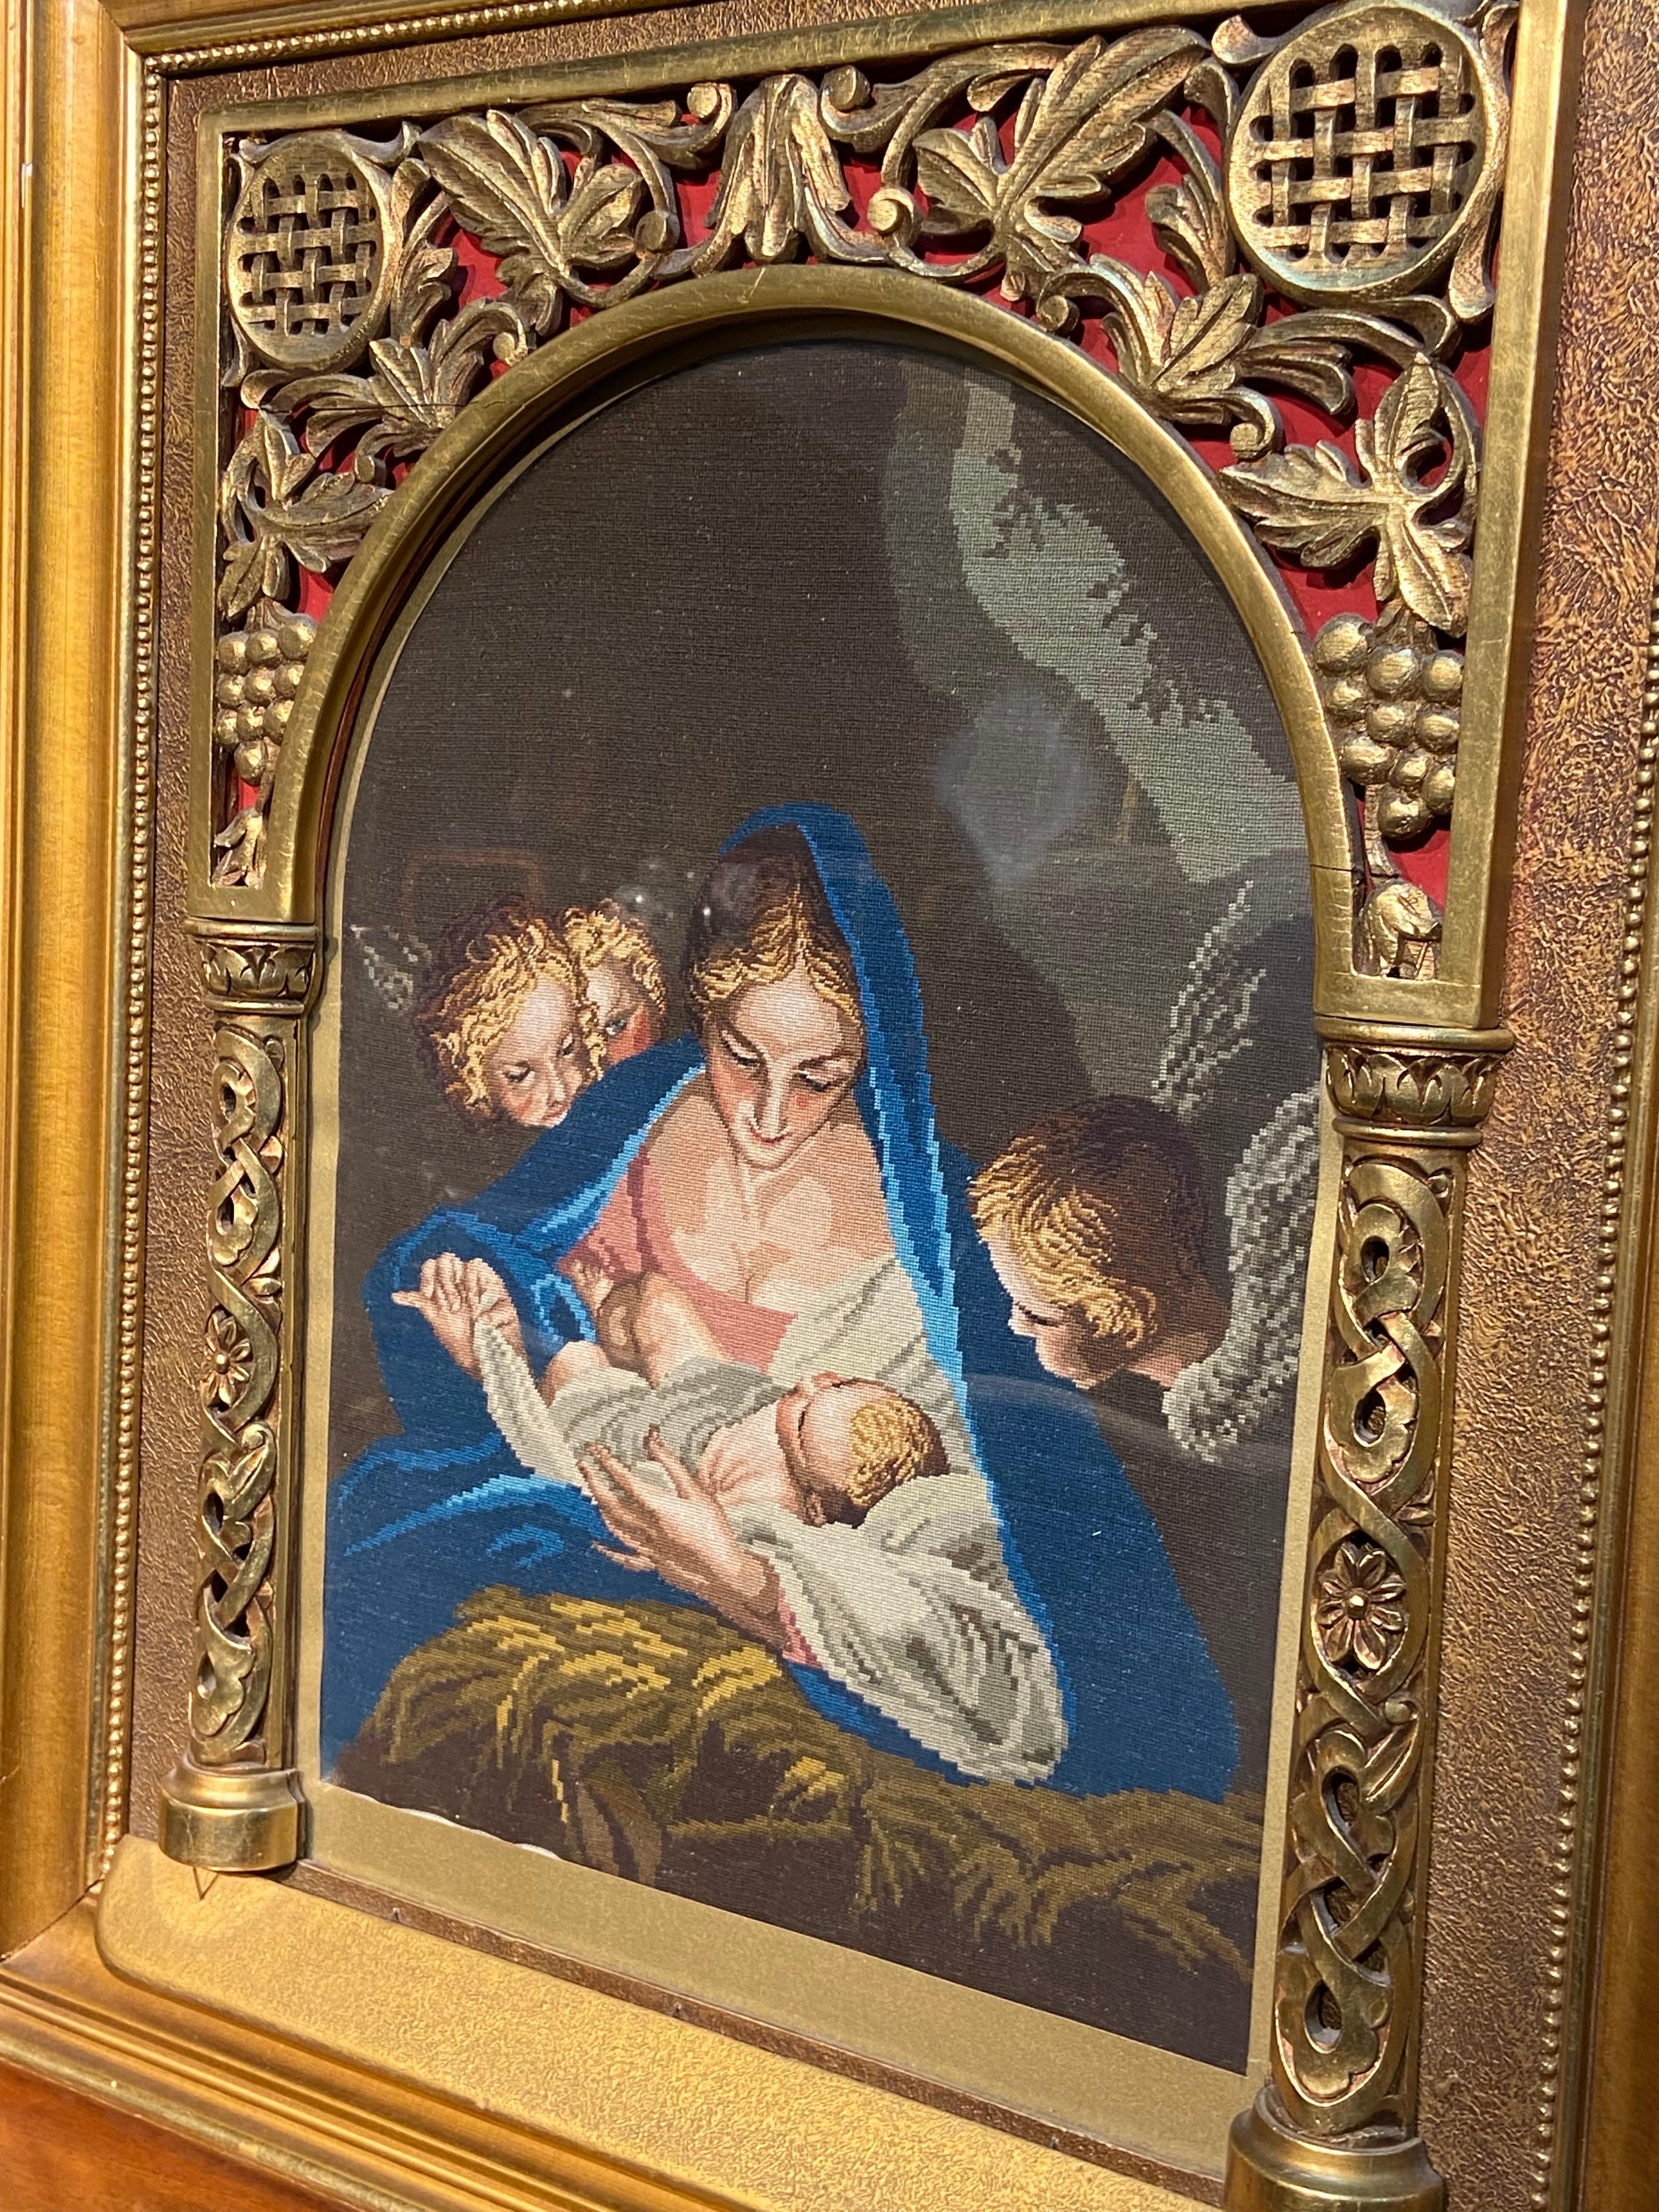 19th Century hand knotted wool tapestry representing Madonna with a Child in vivid colours and peaceful atmosphere with darling angels admiring the scene. The piece is framed in gilt wood hand carved wooden frame which creates an additional special